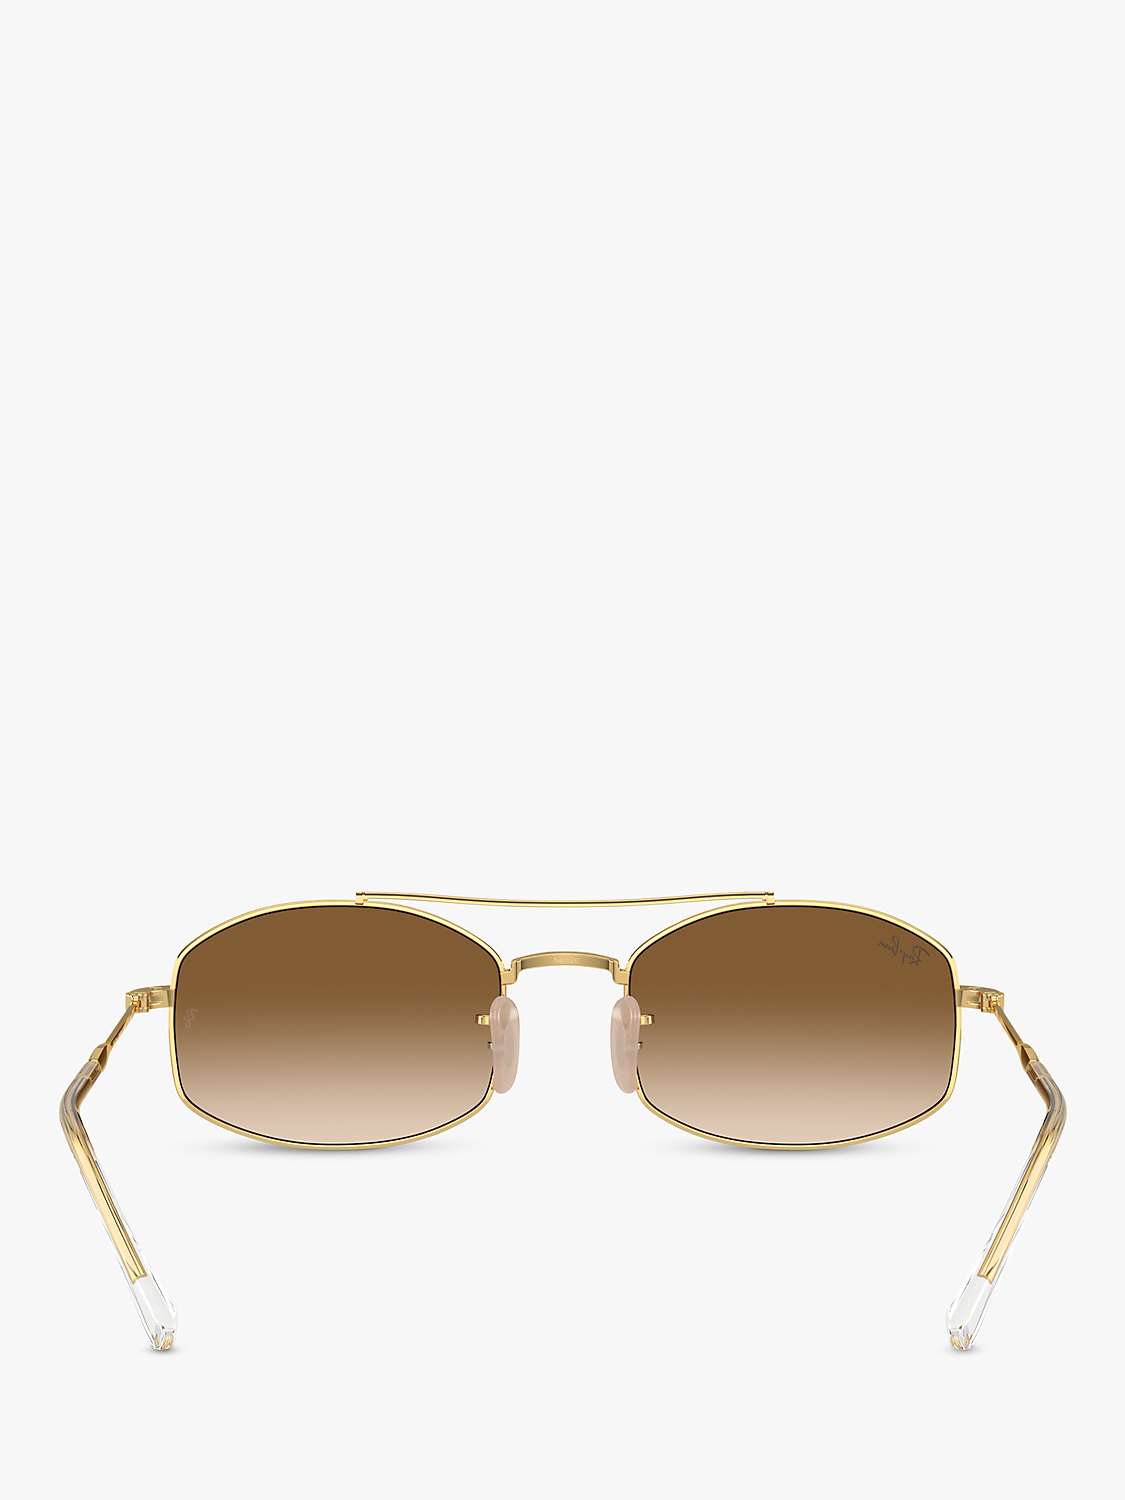 Buy Ray-Ban RB3719 Unisex Oval Sunglasses, Arista Gold/Brown Gradient Online at johnlewis.com